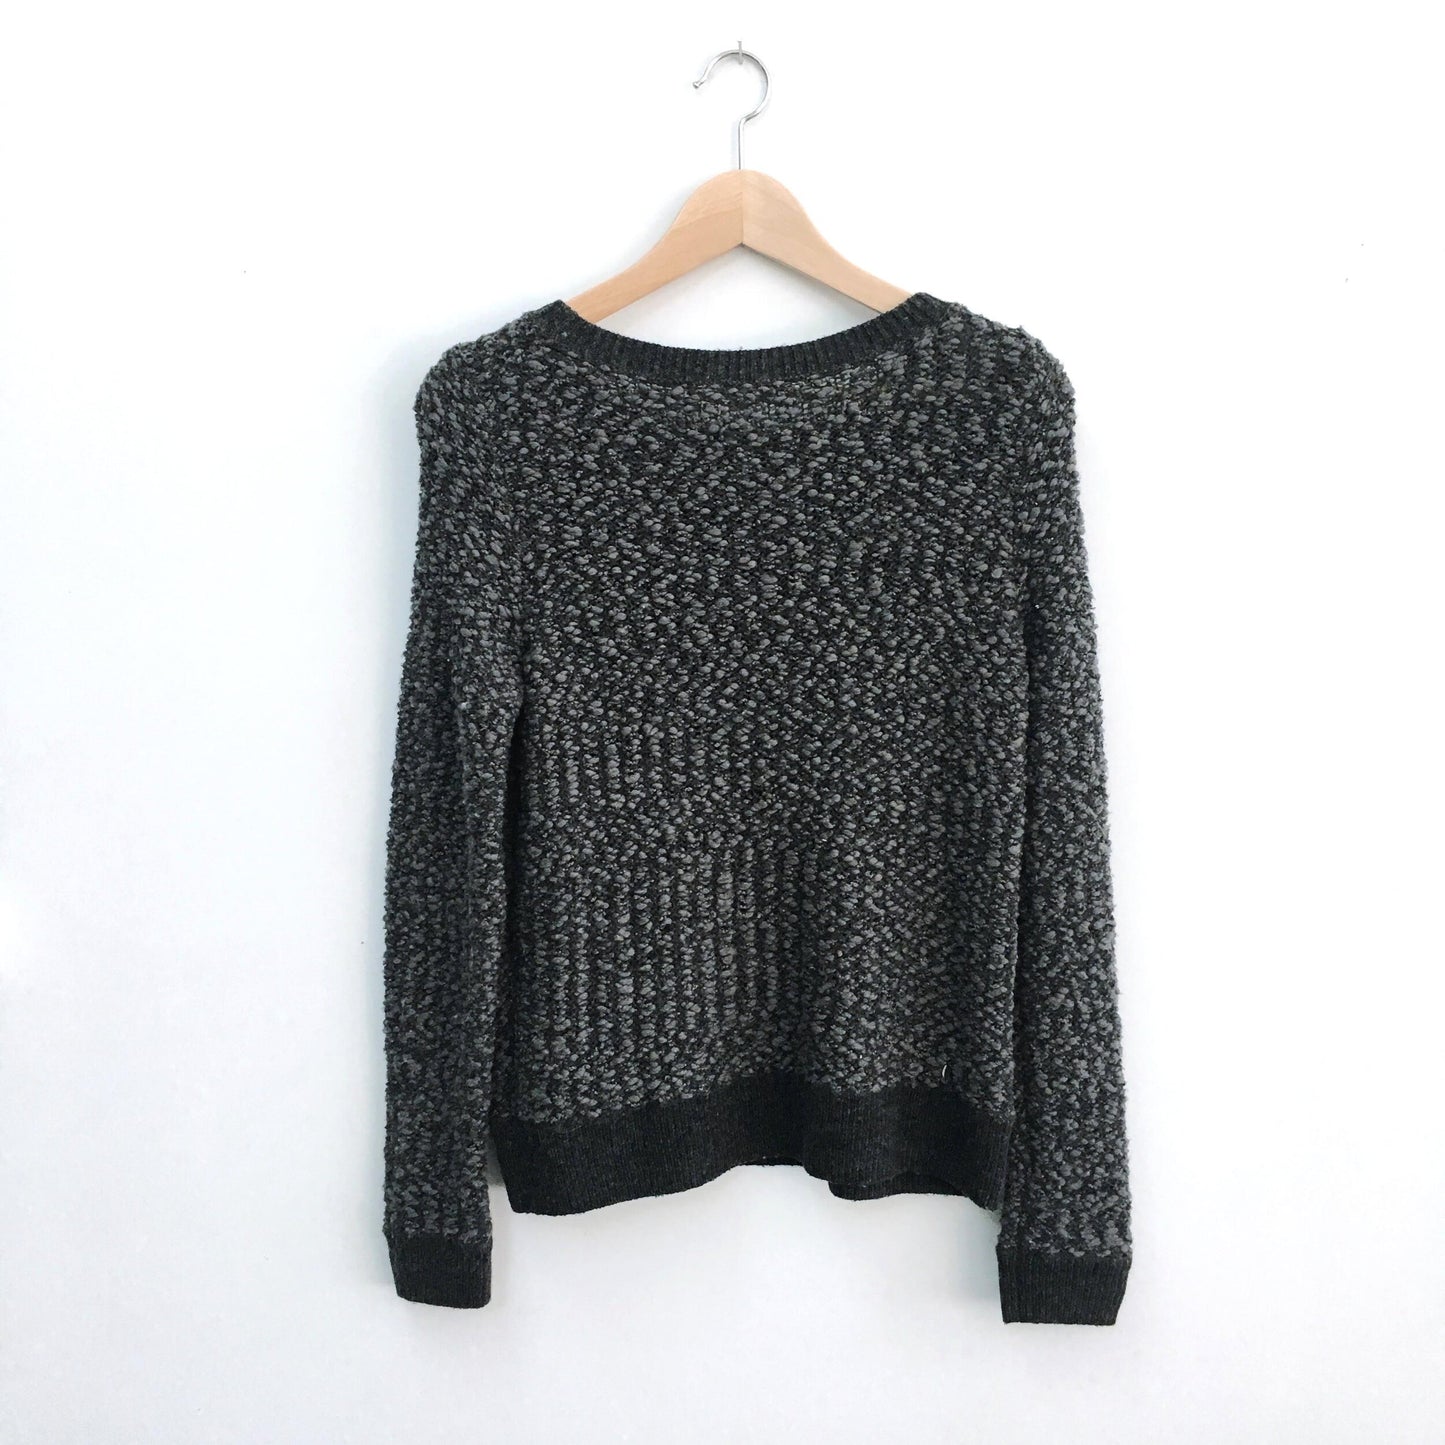 Moth cozy knit pullover - size Small